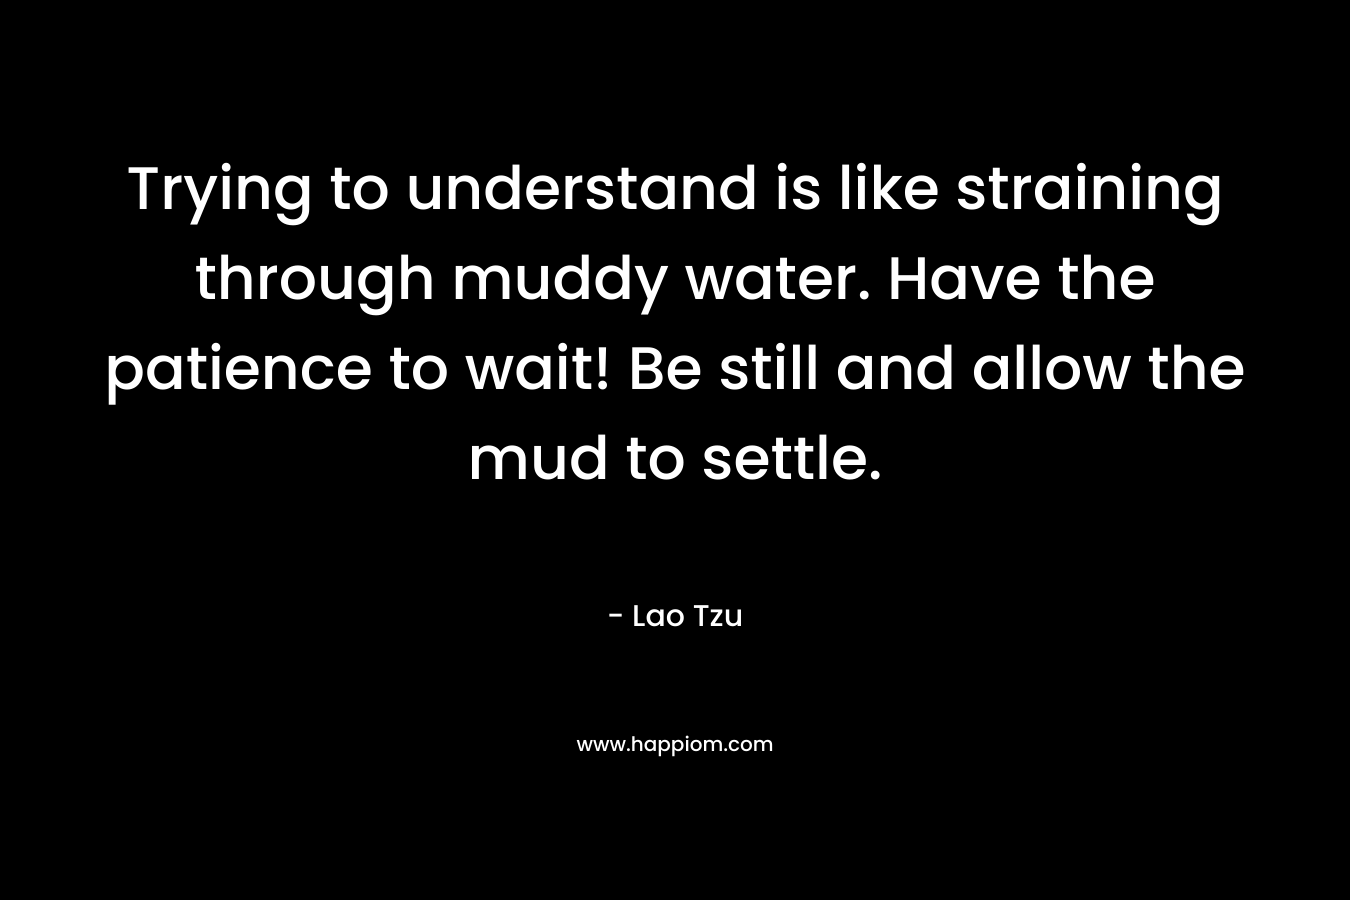 Trying to understand is like straining through muddy water. Have the patience to wait! Be still and allow the mud to settle. – Lao Tzu